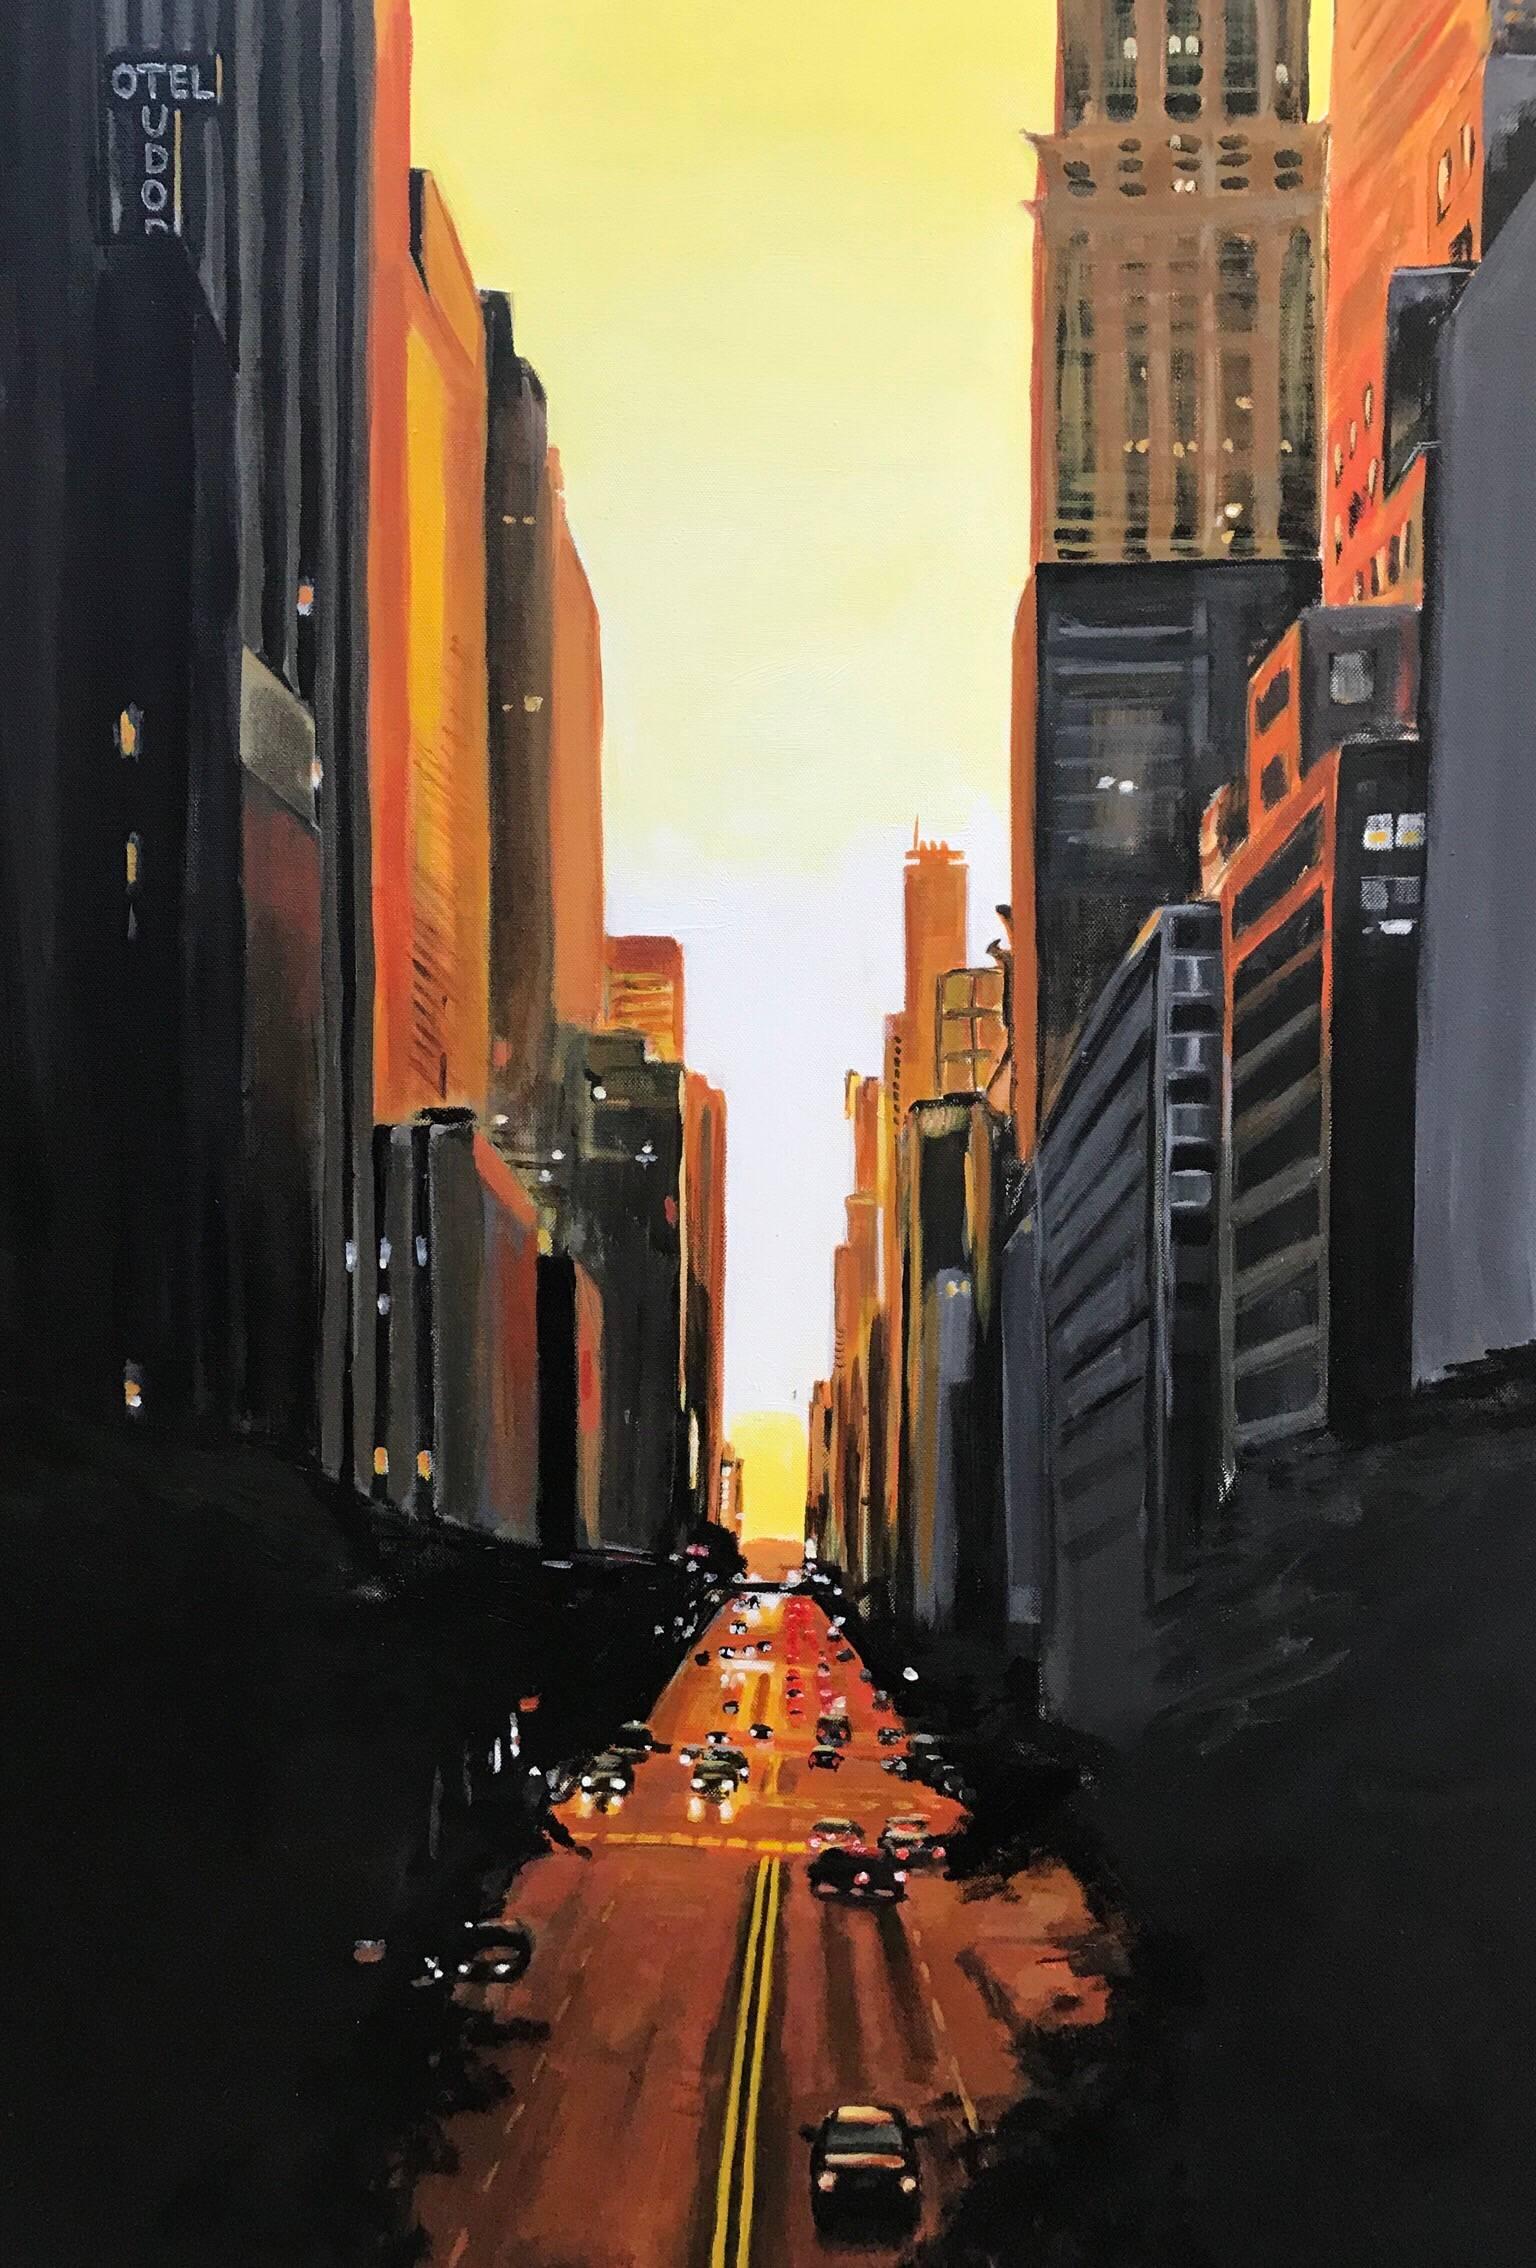 42nd Street Cityscape Painting by British Urban Landscape Artist Angela Wakefield. This original is part of the New York Series and has been featured in exhibitions in the south of England, namely in a showcase entitled ‘Life in the Urban